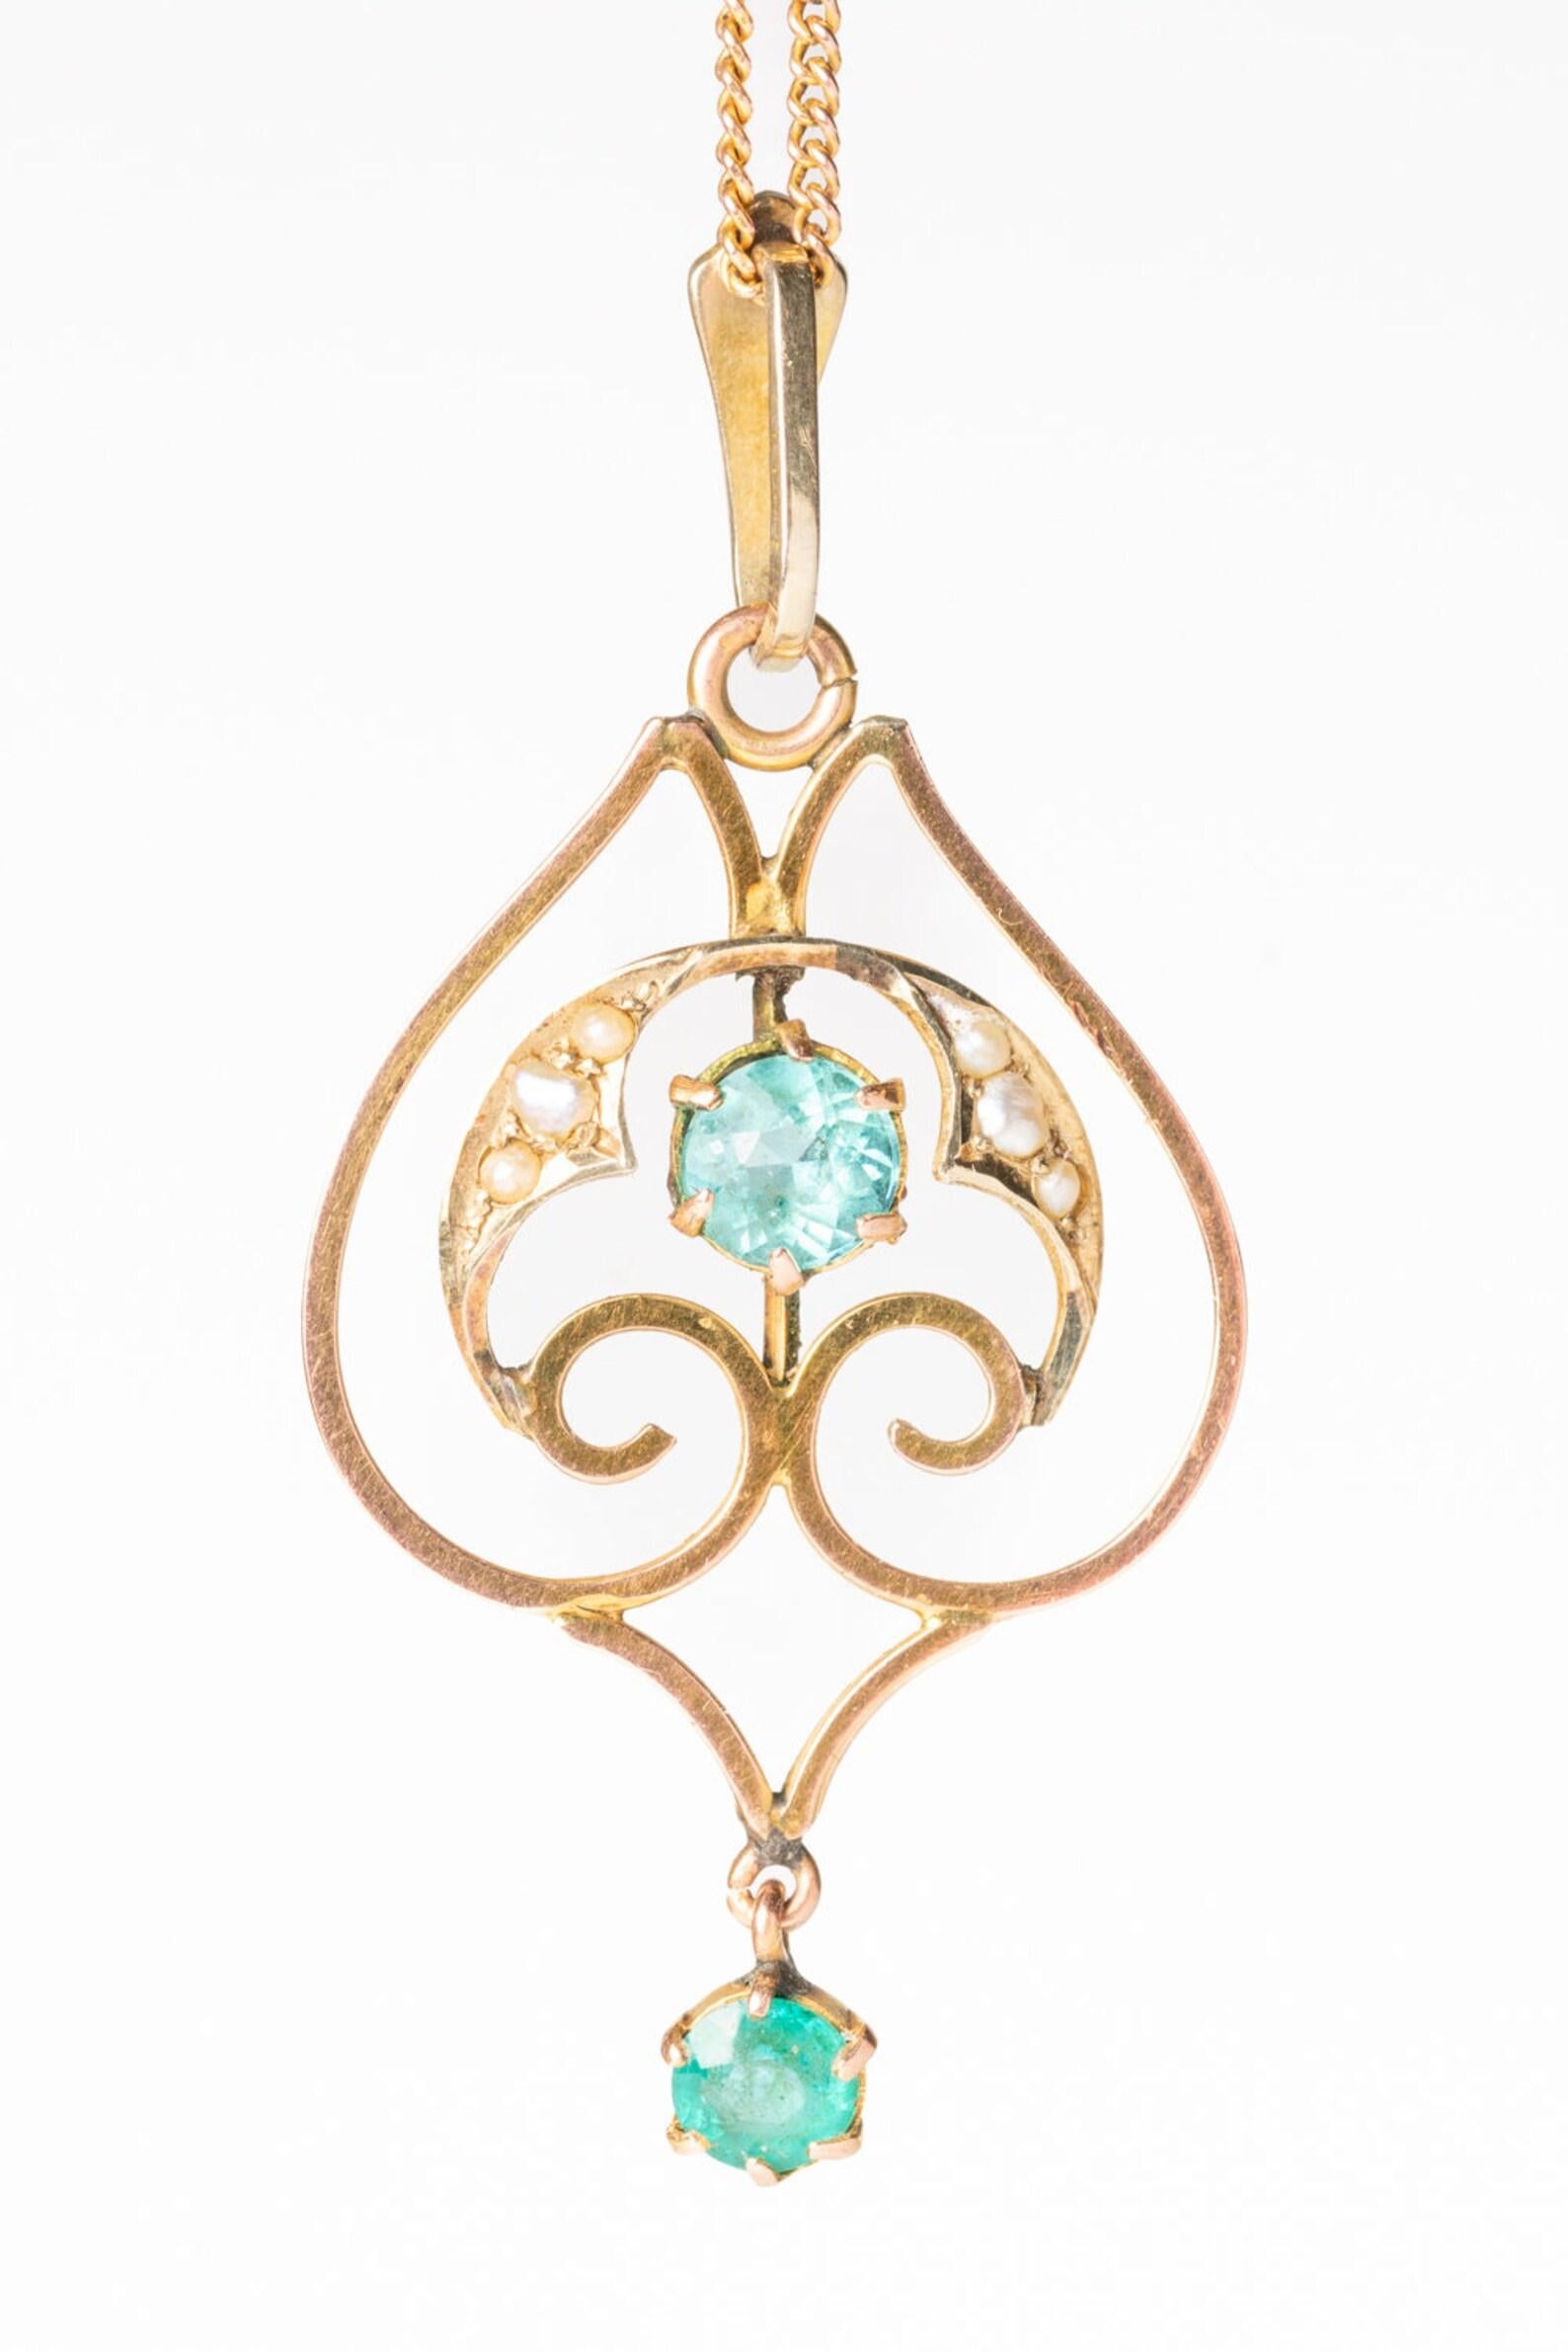 Antique Art Nouveau 9ct Gold Topaz And Pearl Pendant In Excellent Condition For Sale In Portland, England